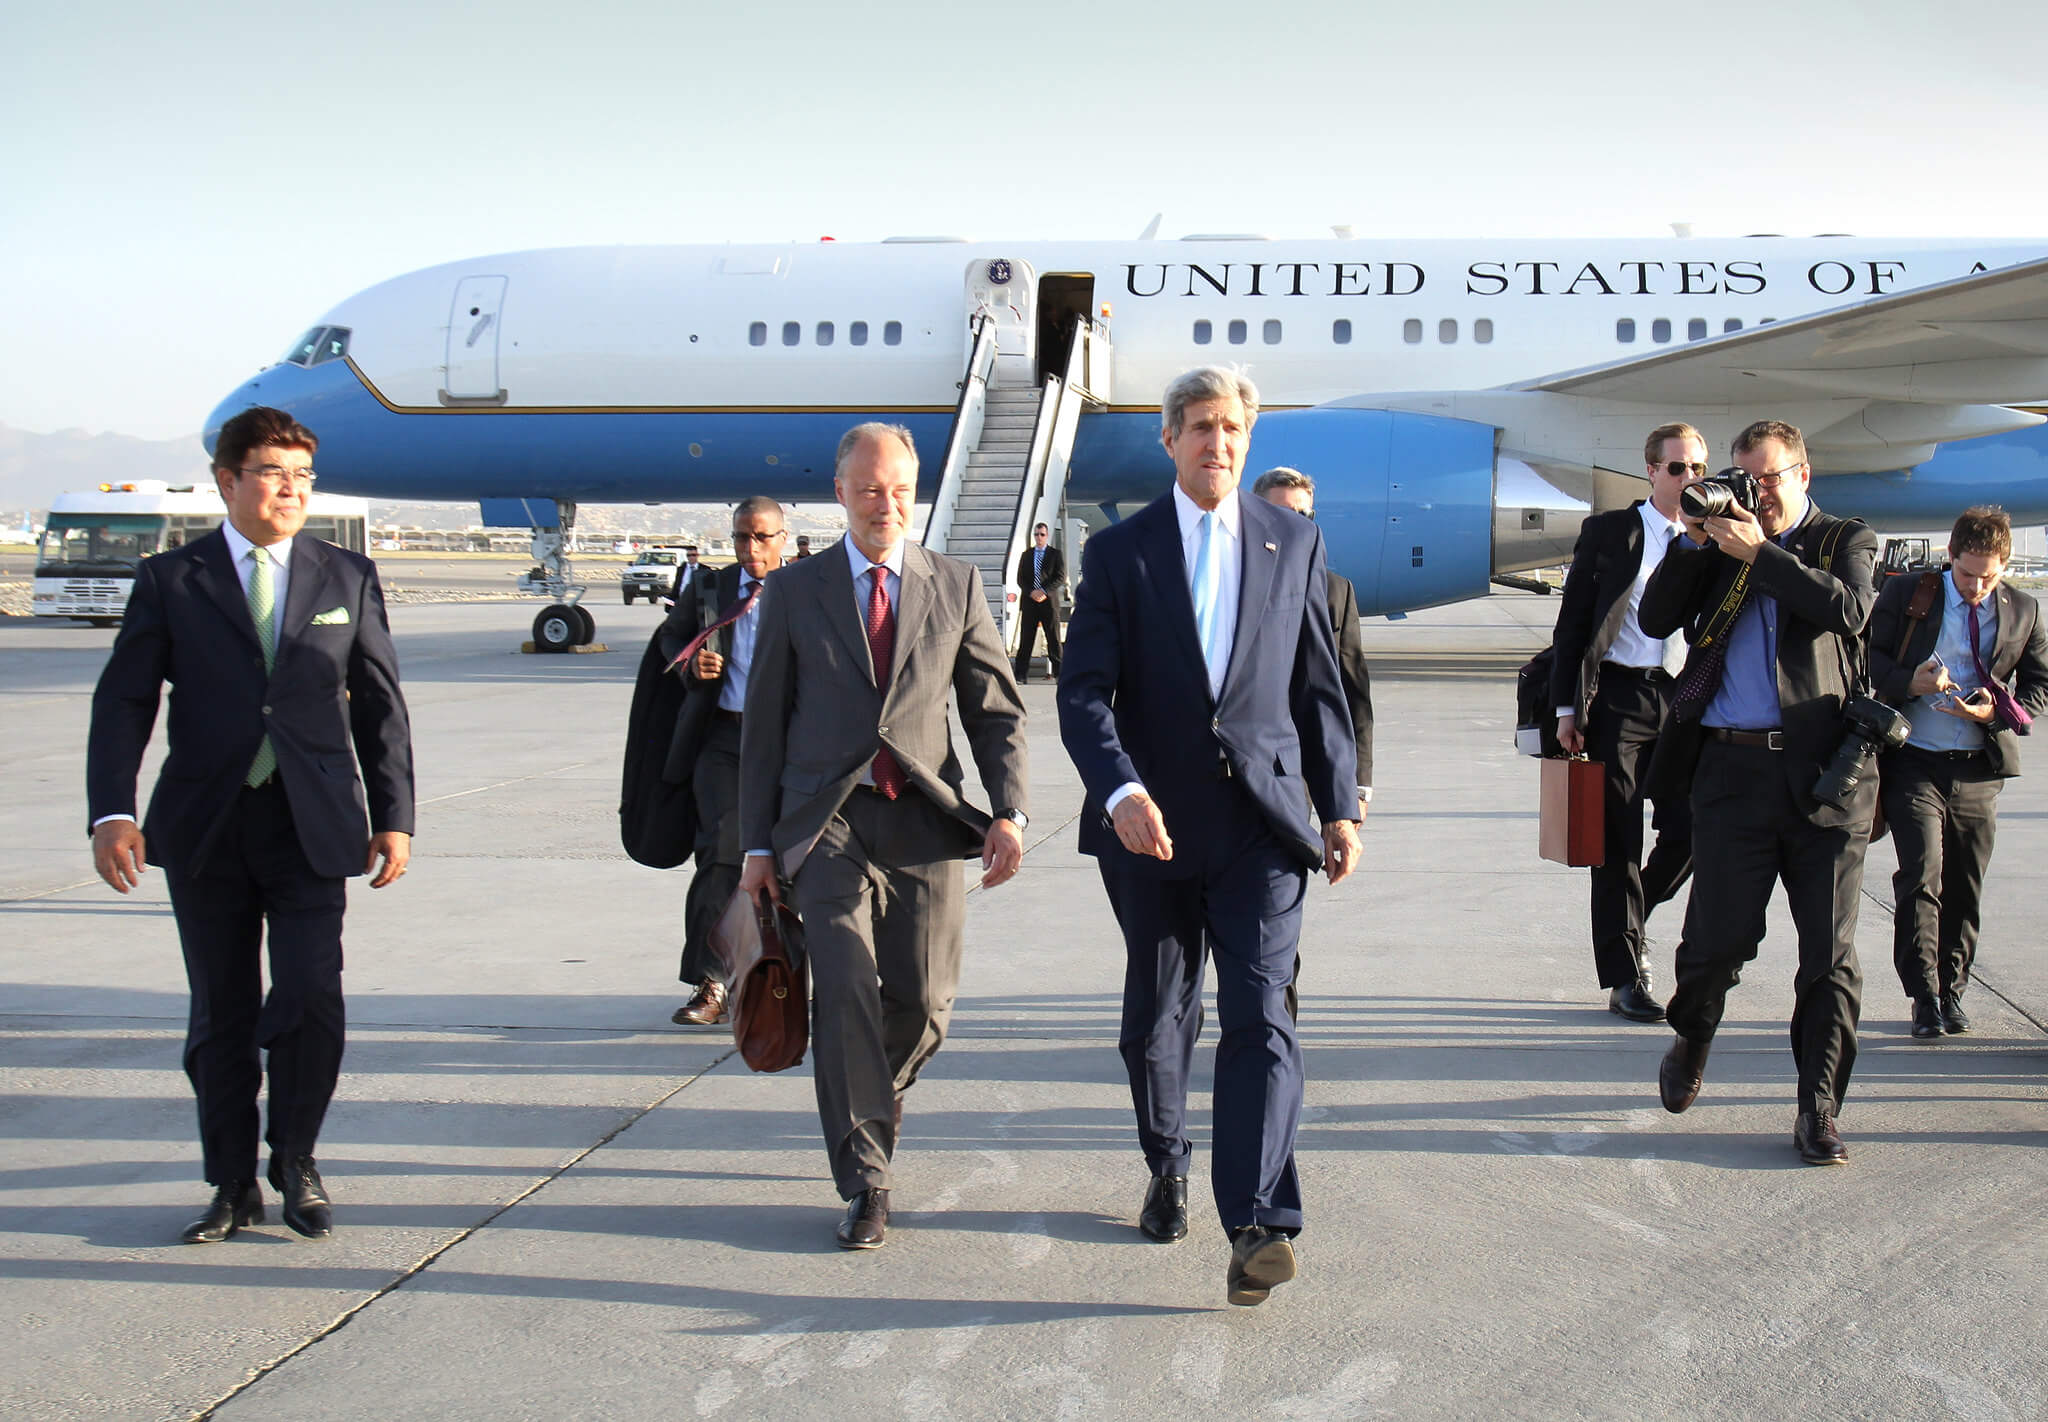 United States Secretary of State John Kerry arrives in Kabul to meet with Abdullah Abdullah, Ashraf Ghani and Hamid Karzai in august 2014. ©US embassy of Kabul, Afghanistan/Flickr